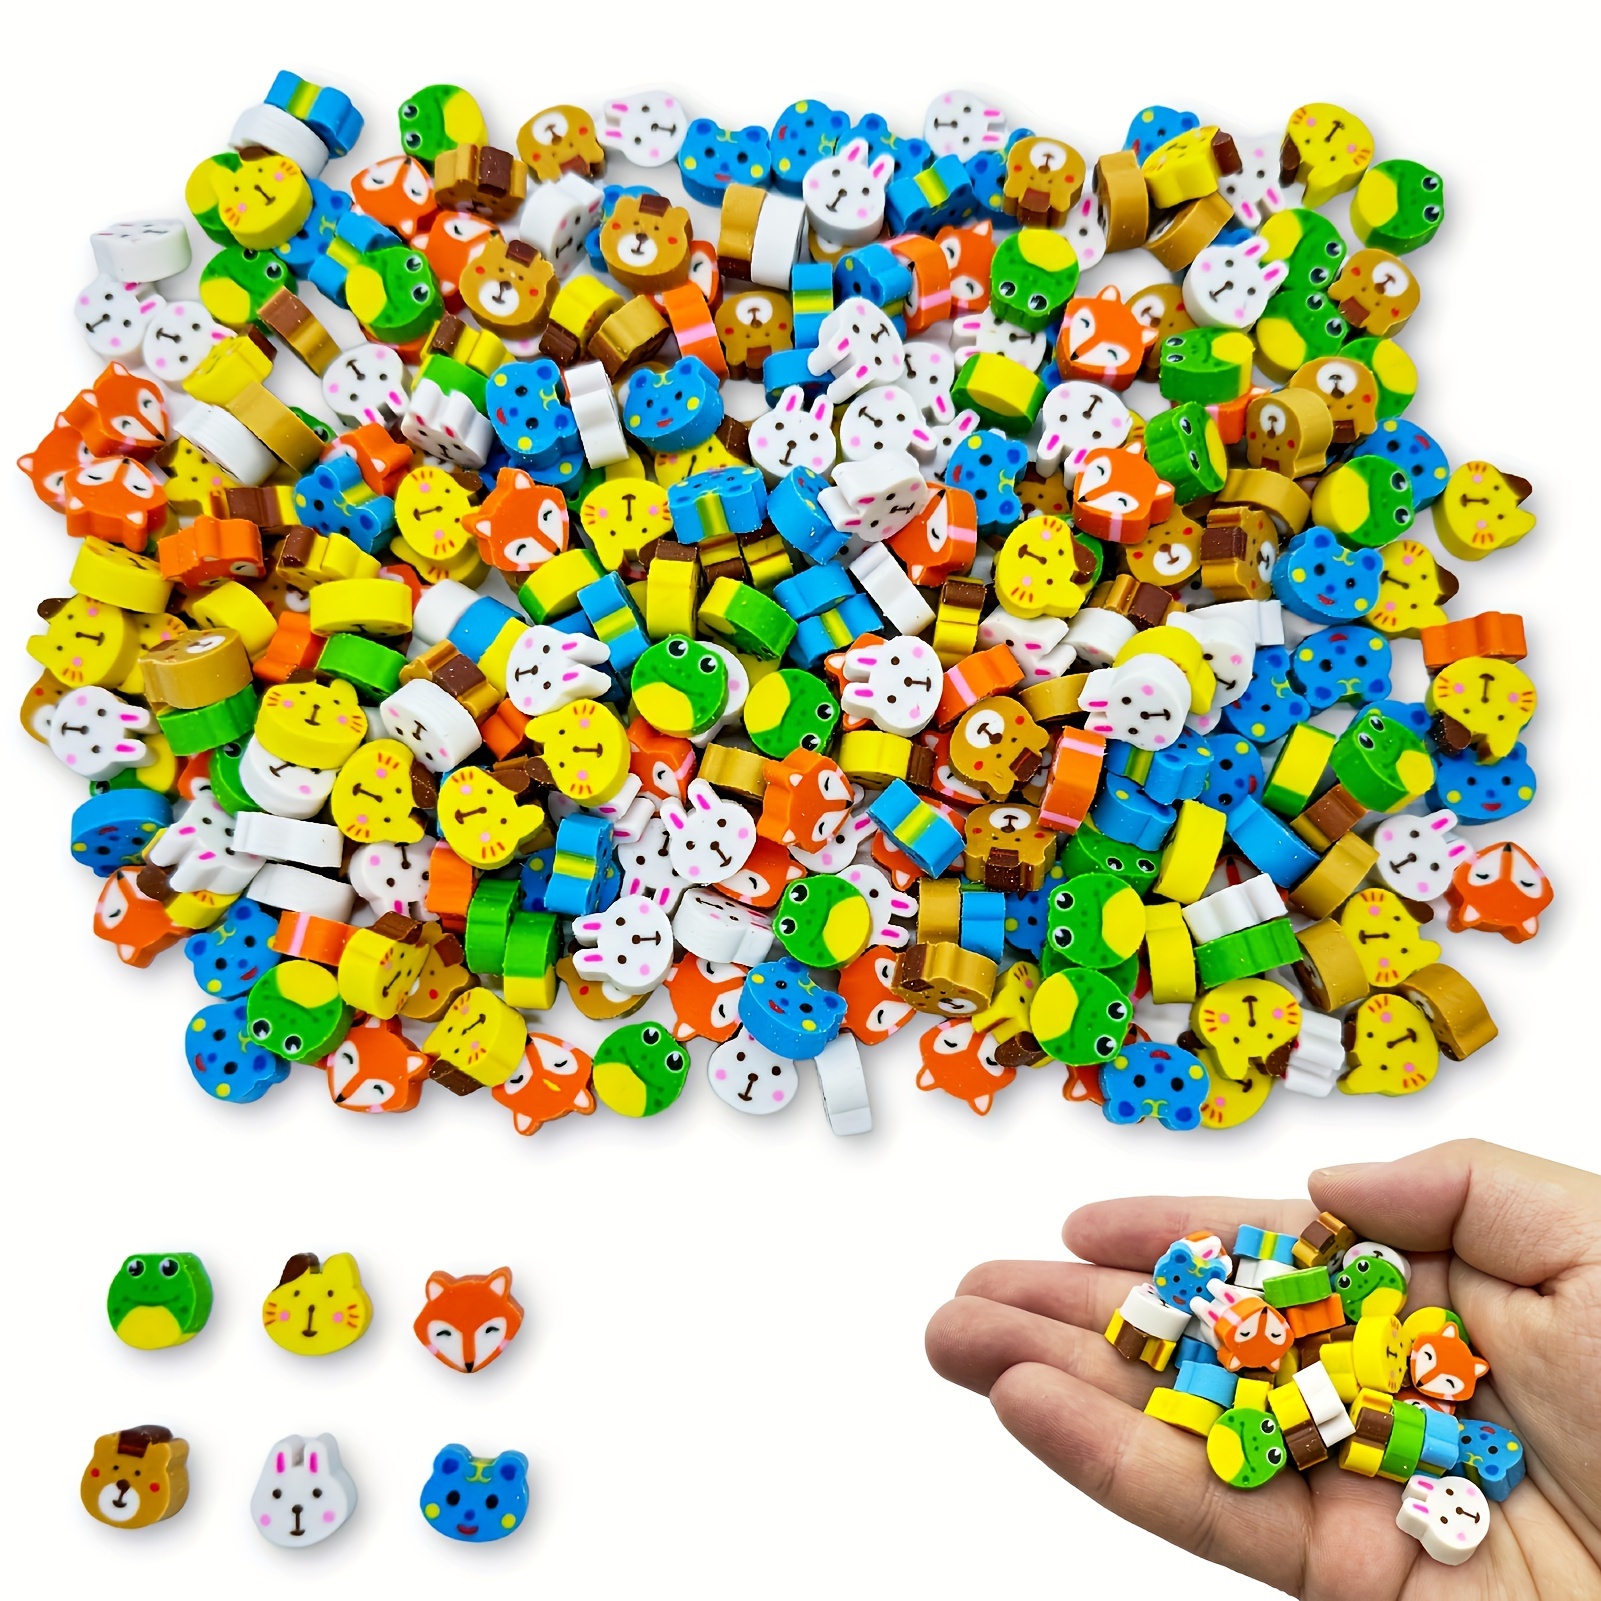 

100pcs Miniature Erasers - Variety Of Adorable Bunny & Unique Designs, Ideal For School And Office Accessories Small Erasers For Young Ones In Bulk